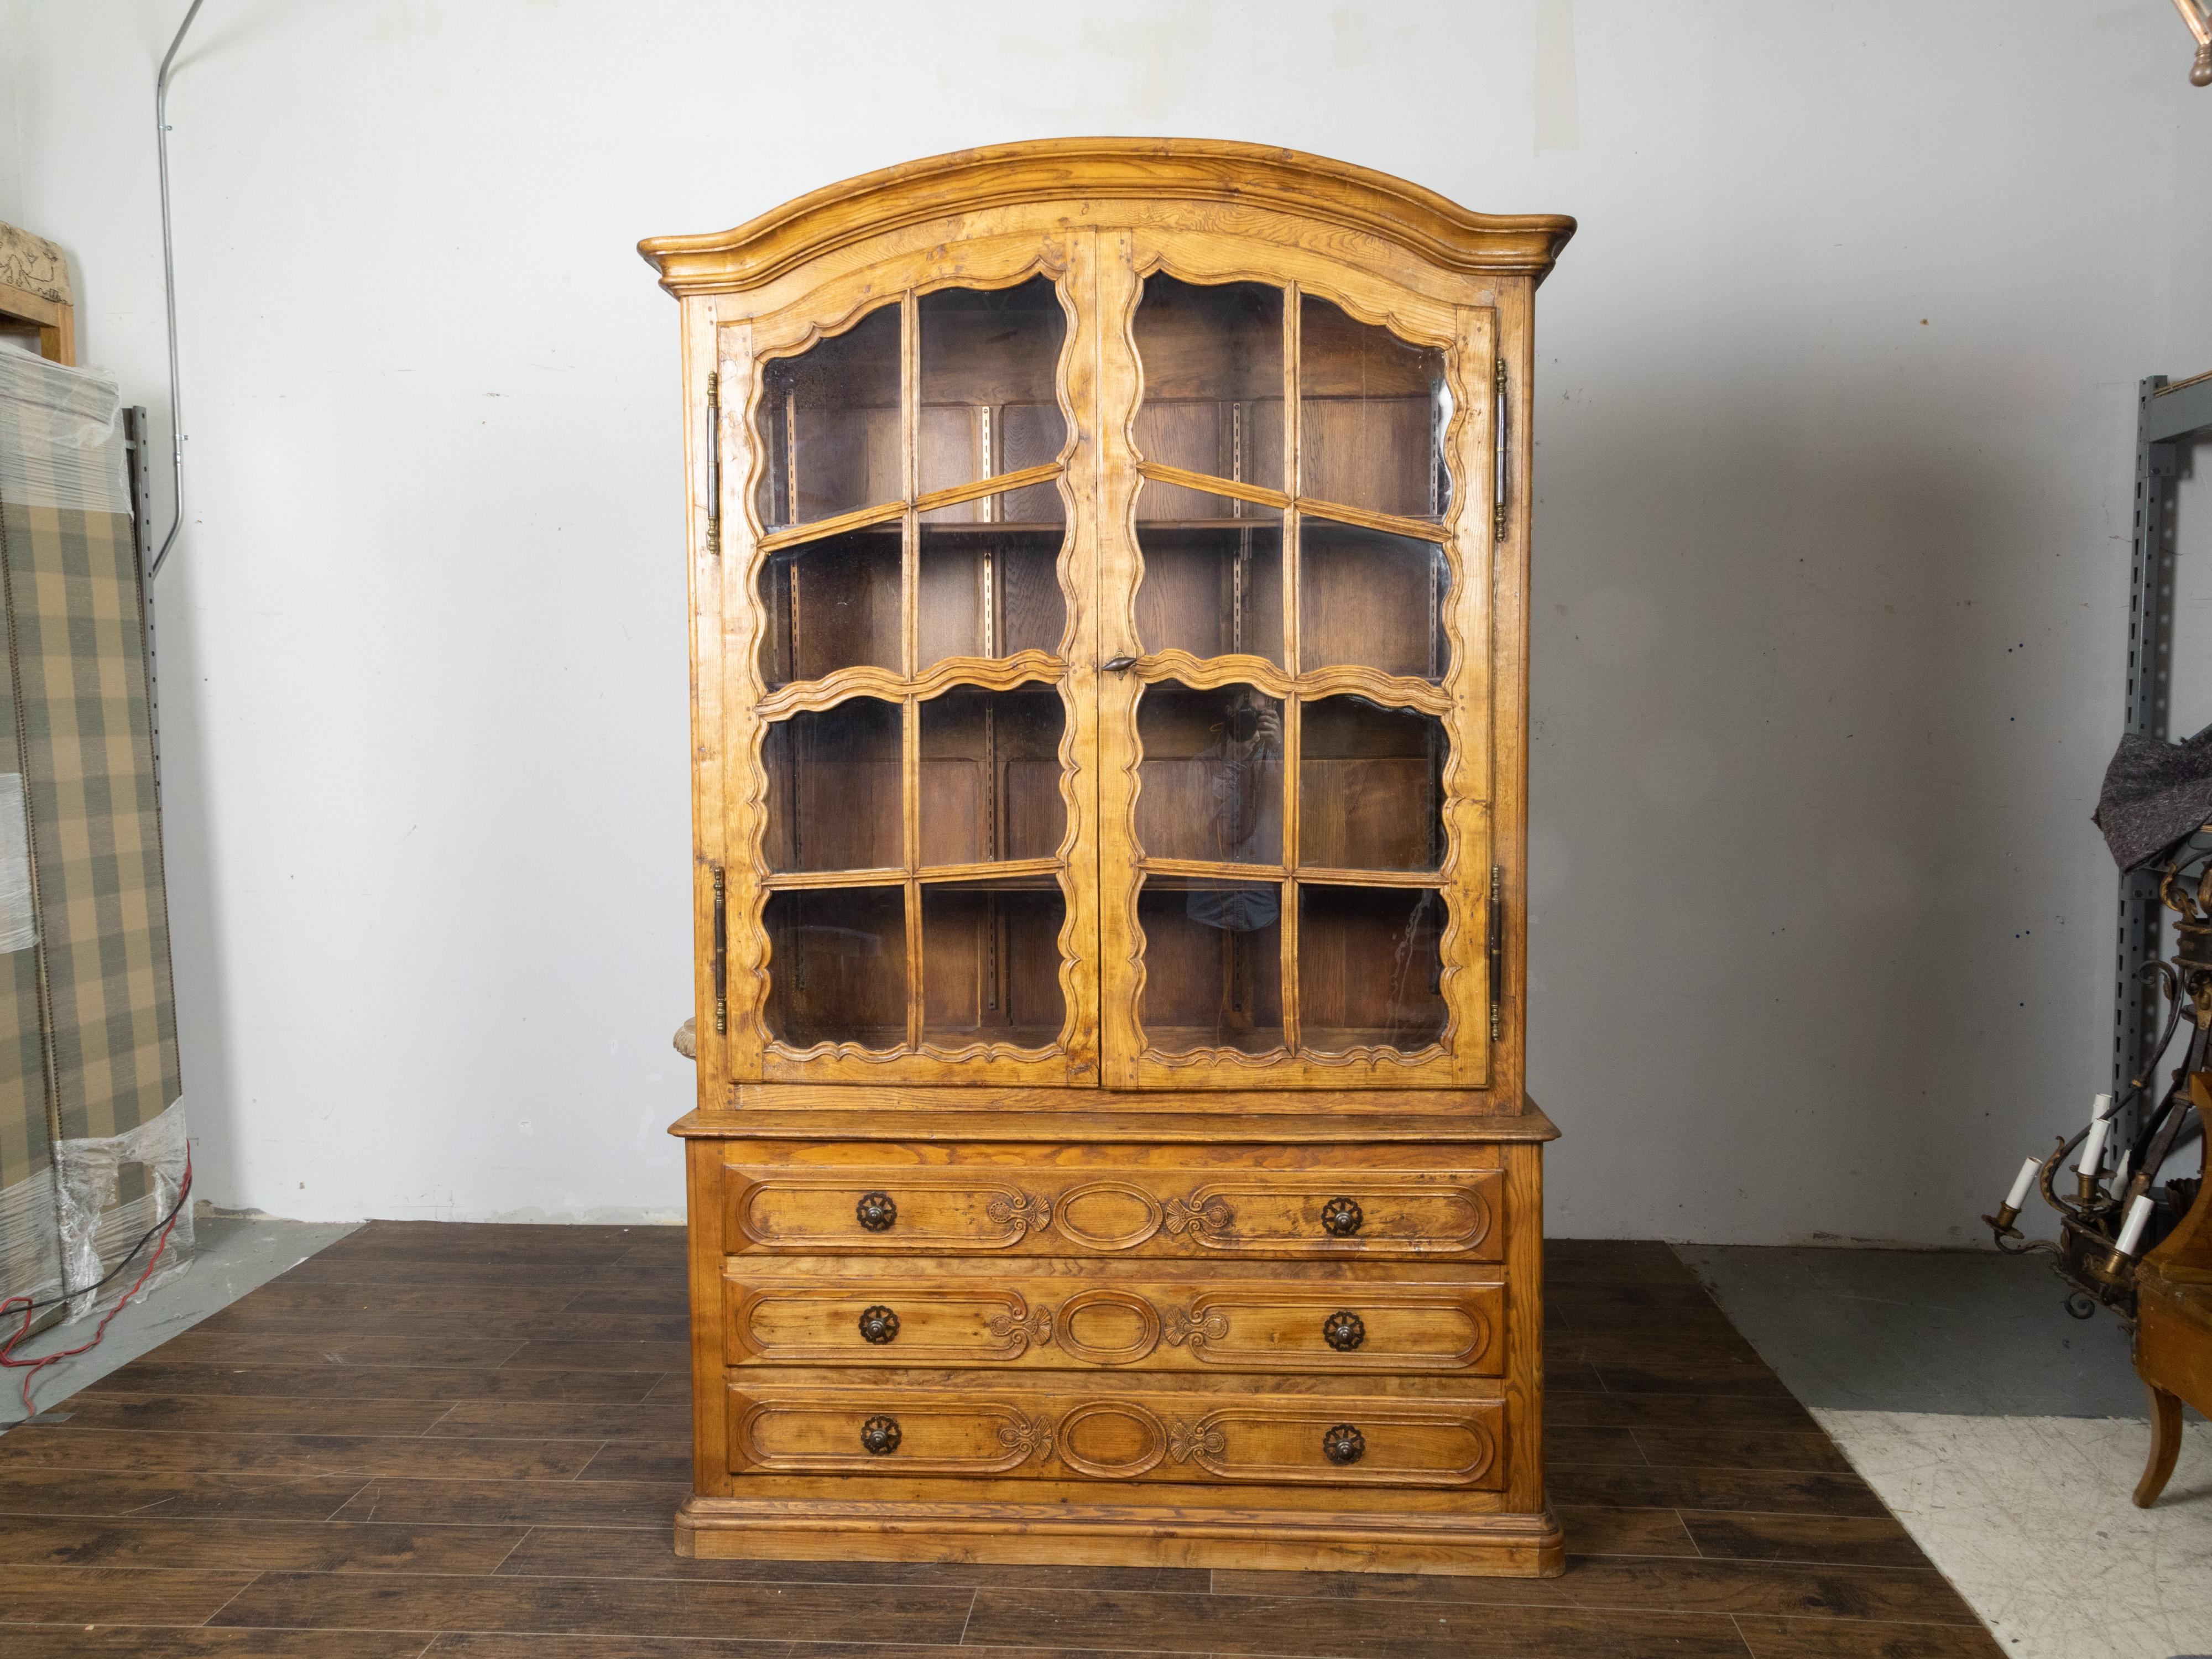 A French elm vitrine cabinet from the 19th century, with chapeau de gendarme top, glass doors, carved décor and three drawers. Created in France during the 19th century, this elm vitrine cabinet features a narrow upper section topped with a chapeau